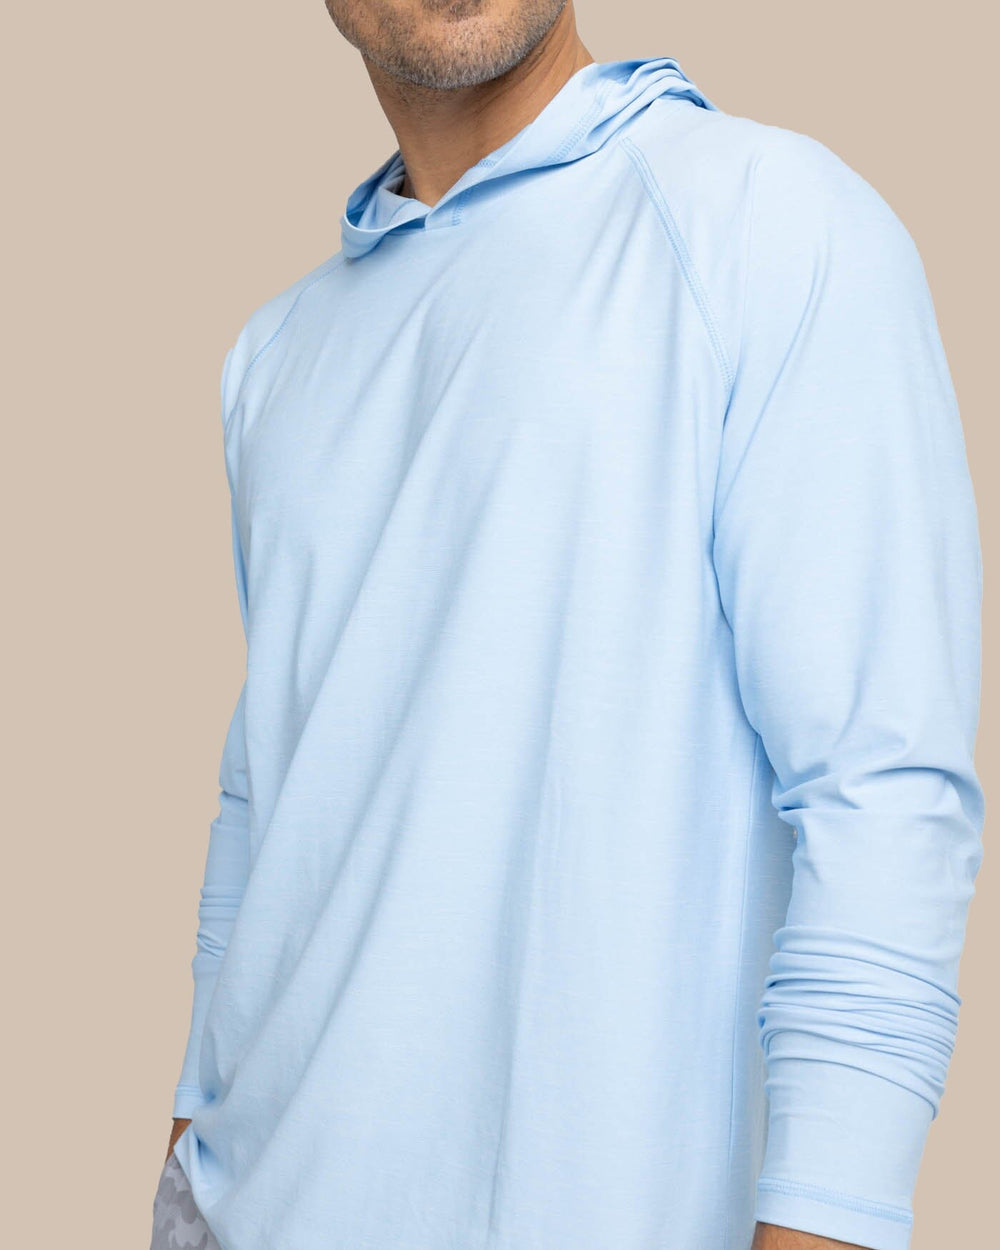 The detail view of the Southern Tide brrr illiant Performance Hoodie by Southern Tide - Clearwater Blue